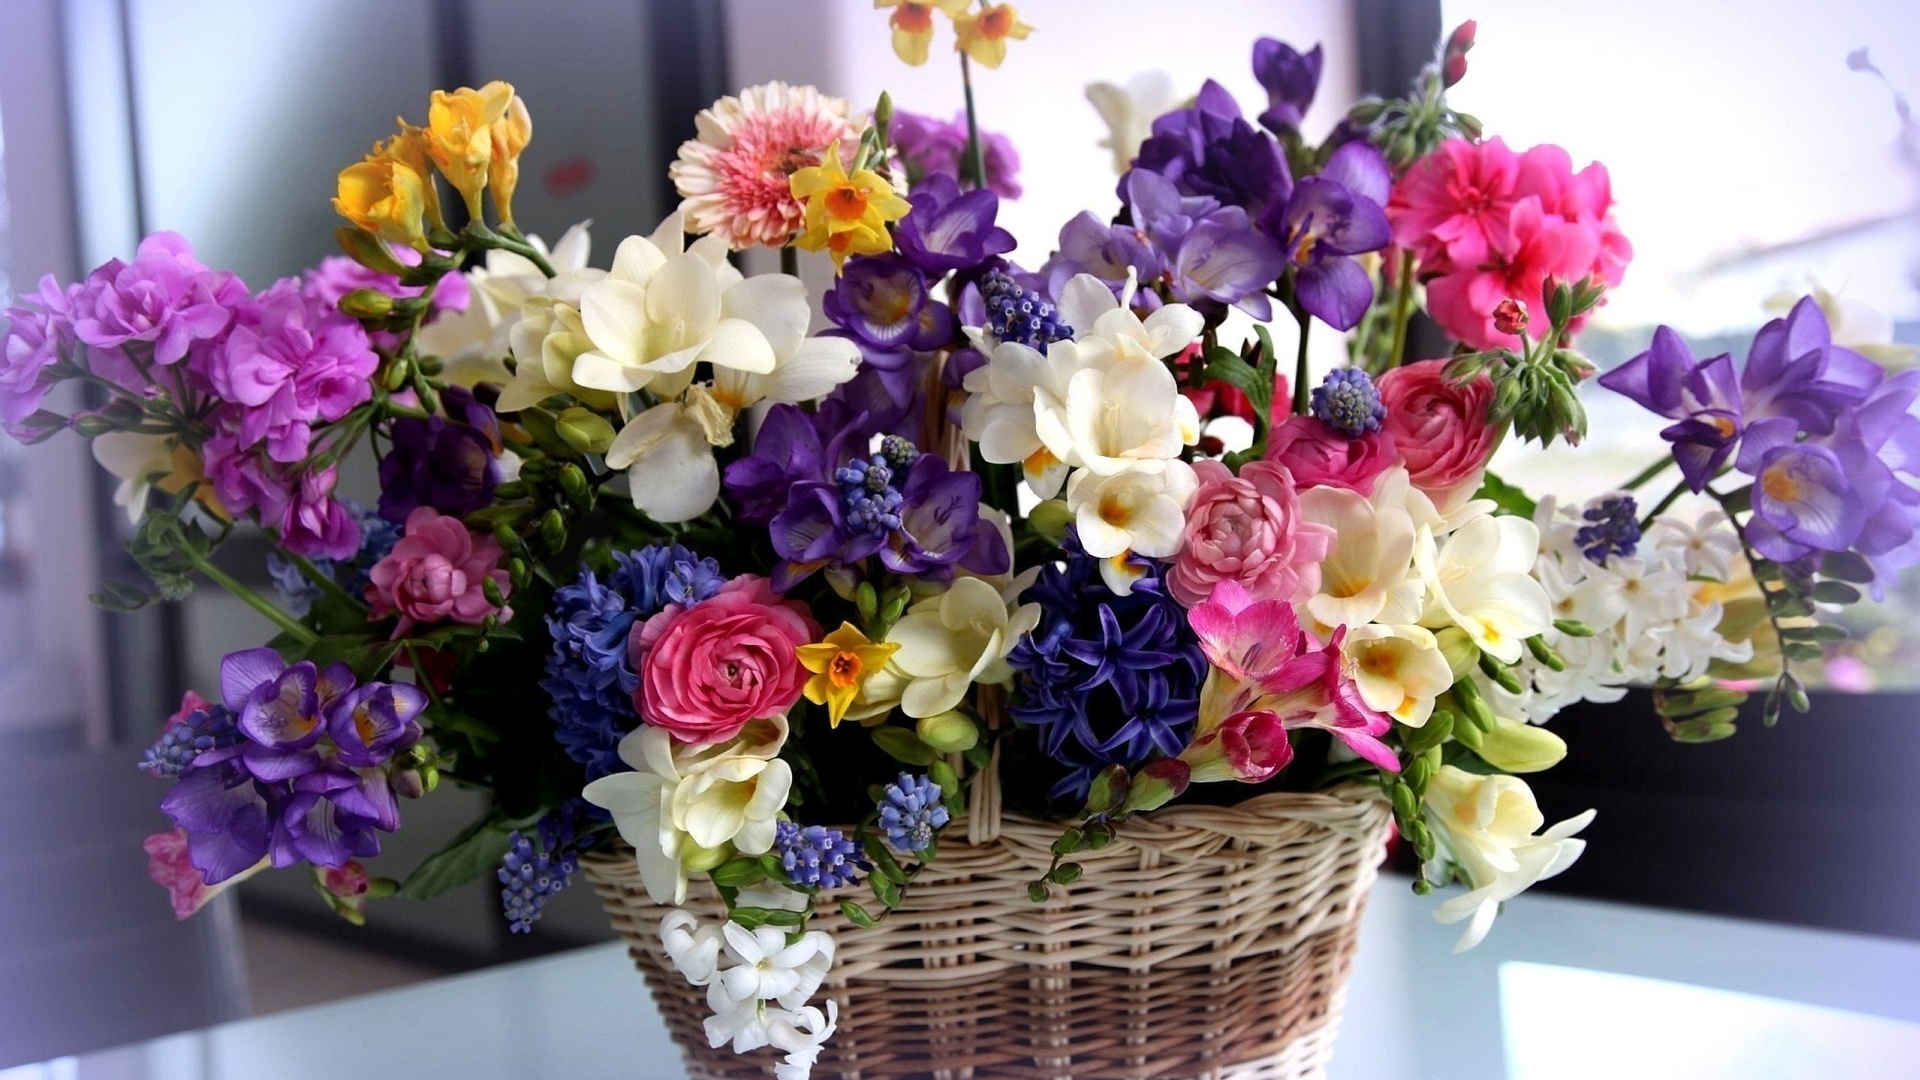 Basket With Flowers download image